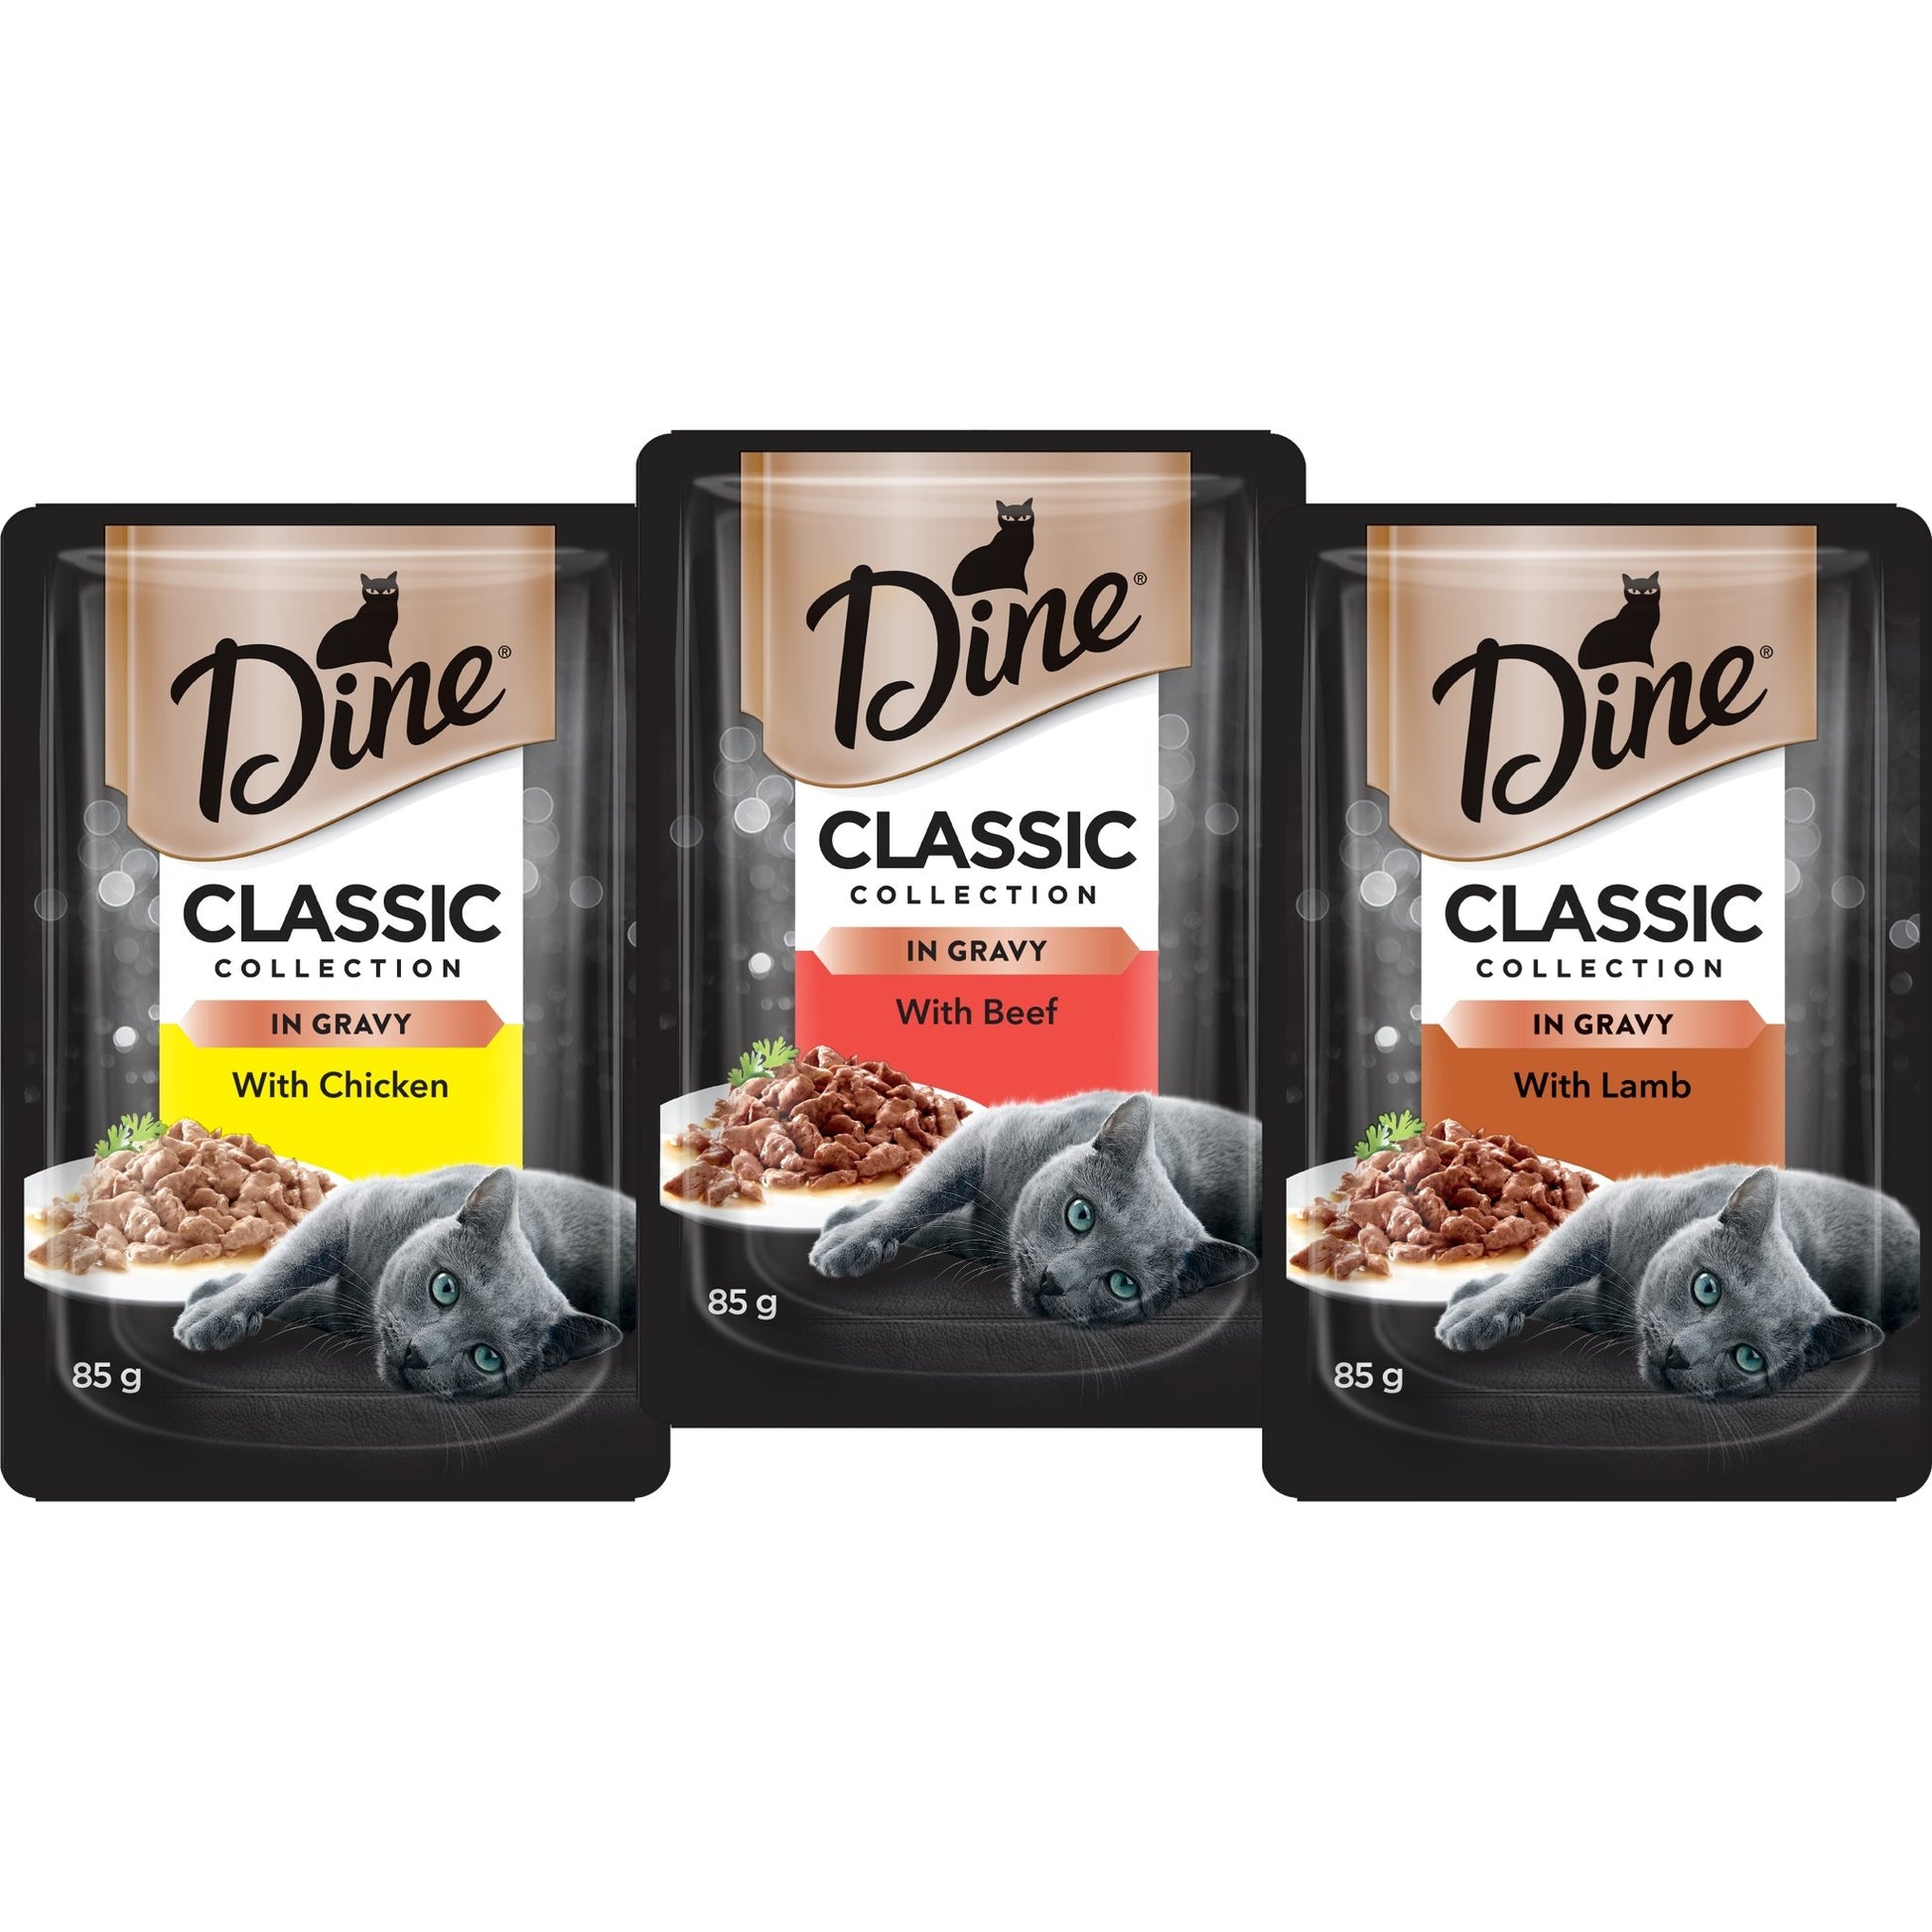 Dine Classic Collection in Gravy Succulent Selection12x85g - Woonona Petfood & Produce